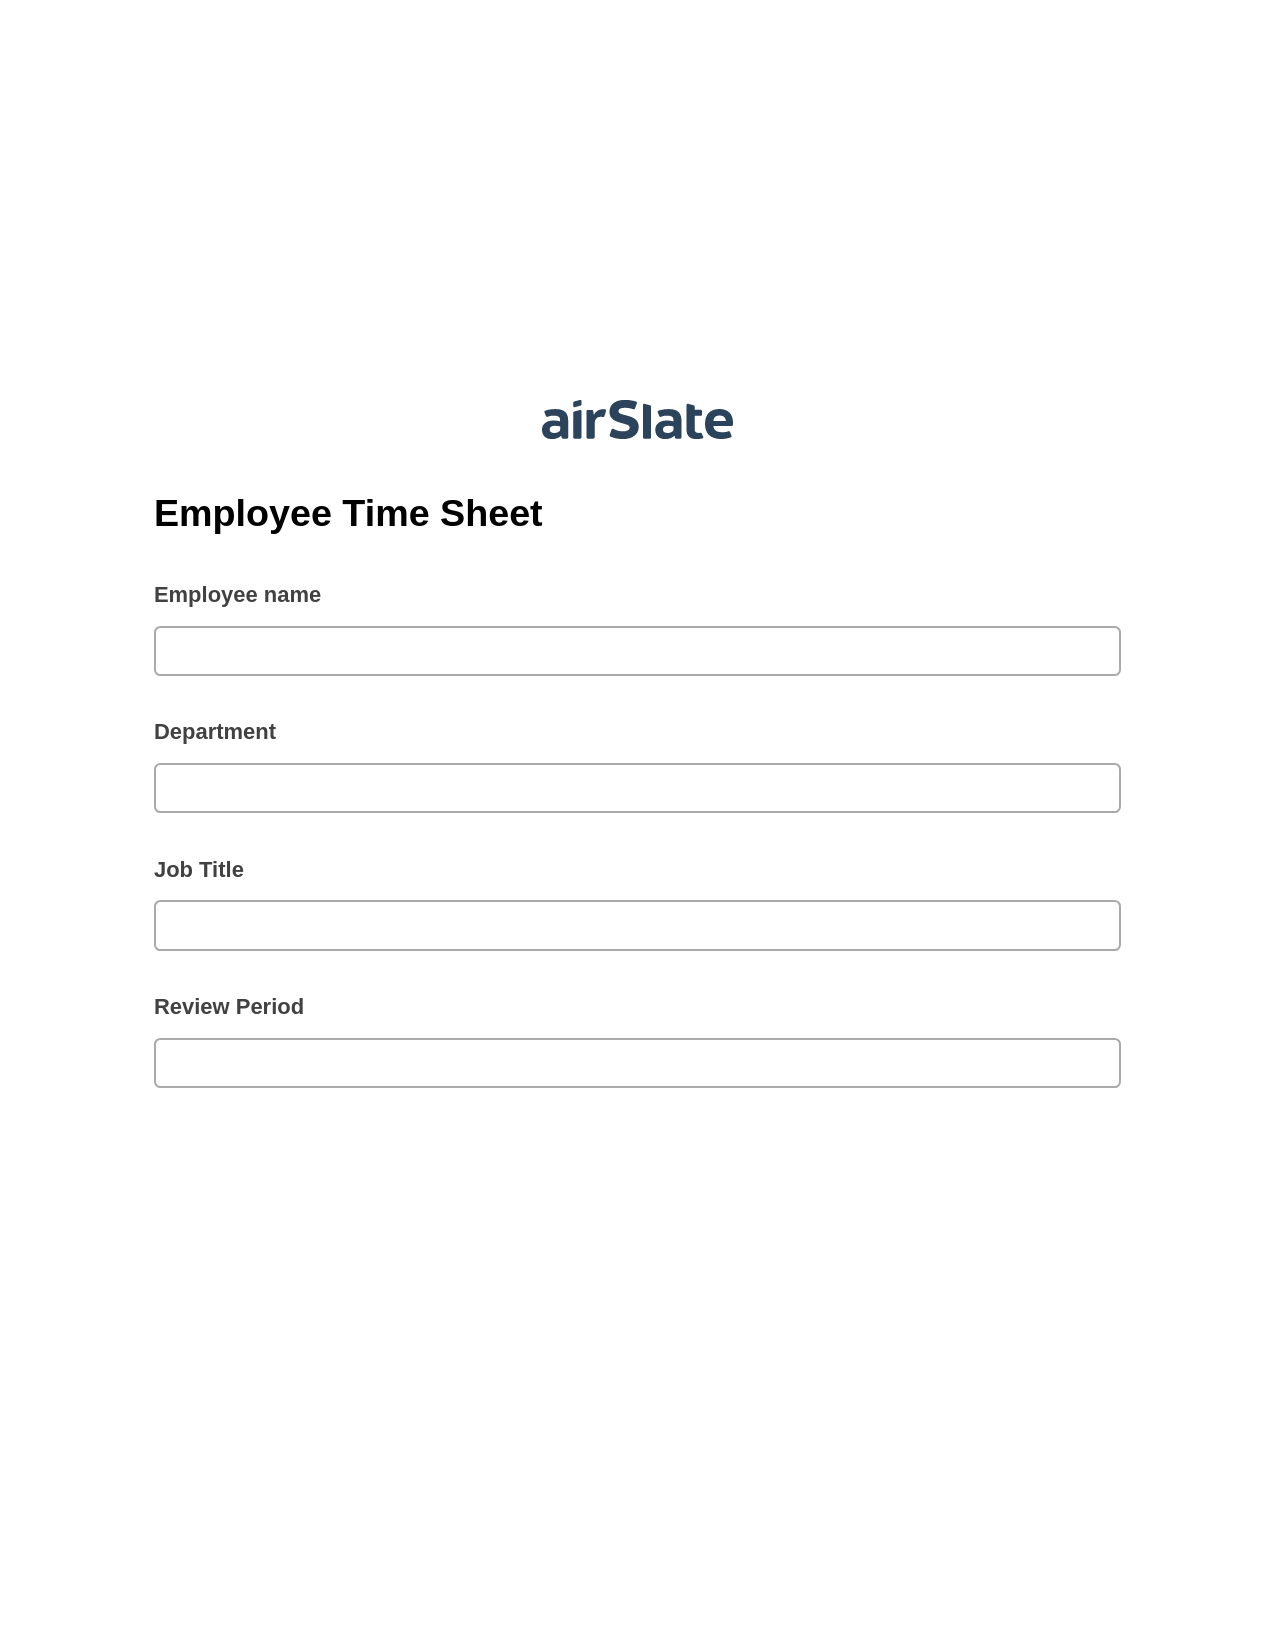 Employee Time Sheet Pre-fill Dropdowns from Excel Bot, Create Salesforce Records Bot, Post-finish Document Bot